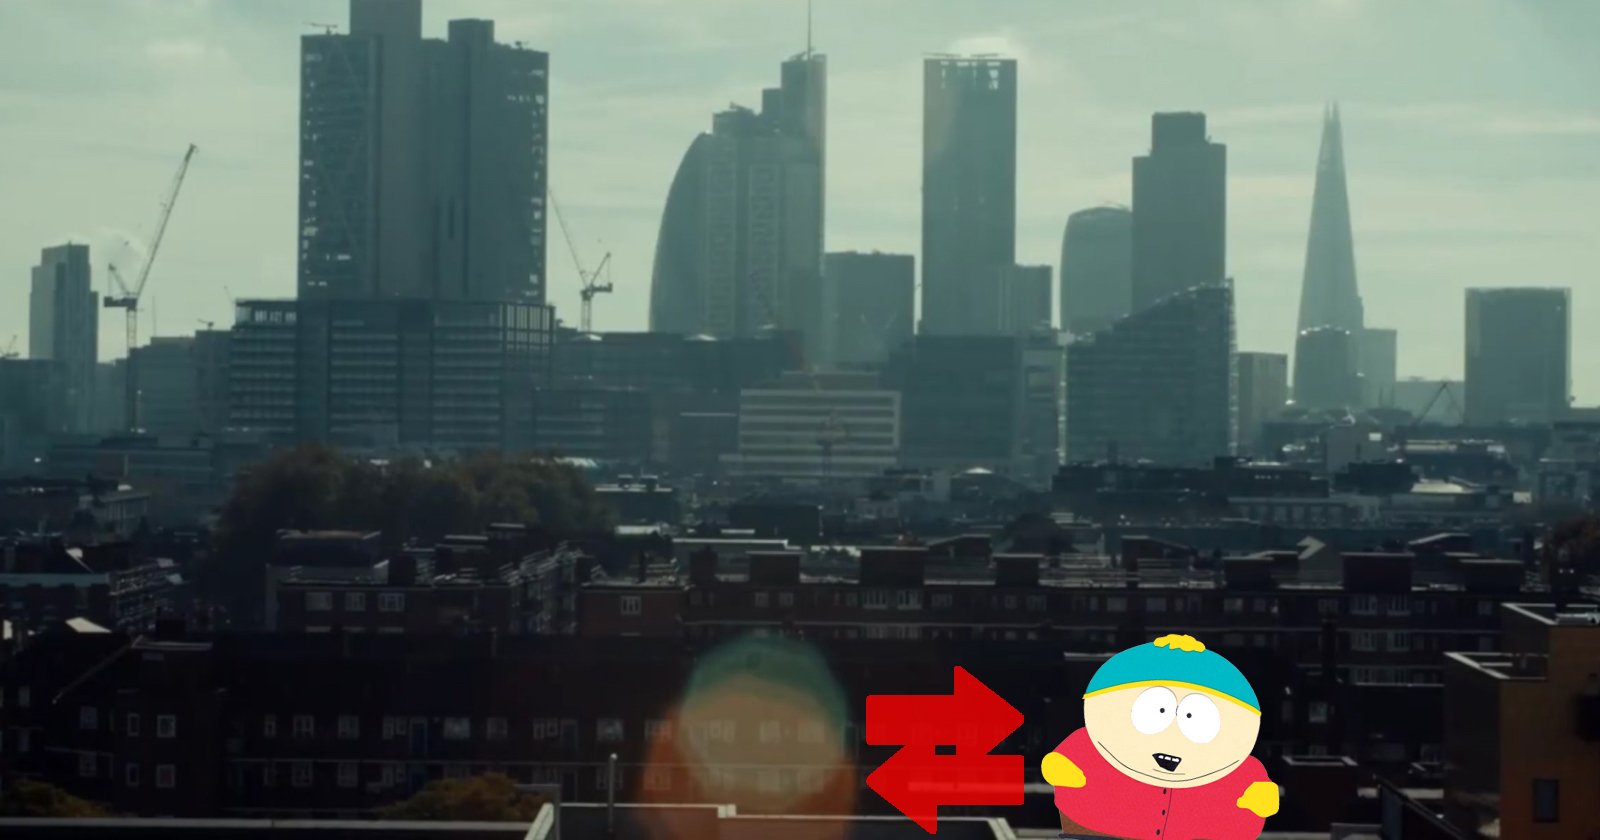  eric cartman lens flare photo becomes all-time reddit 